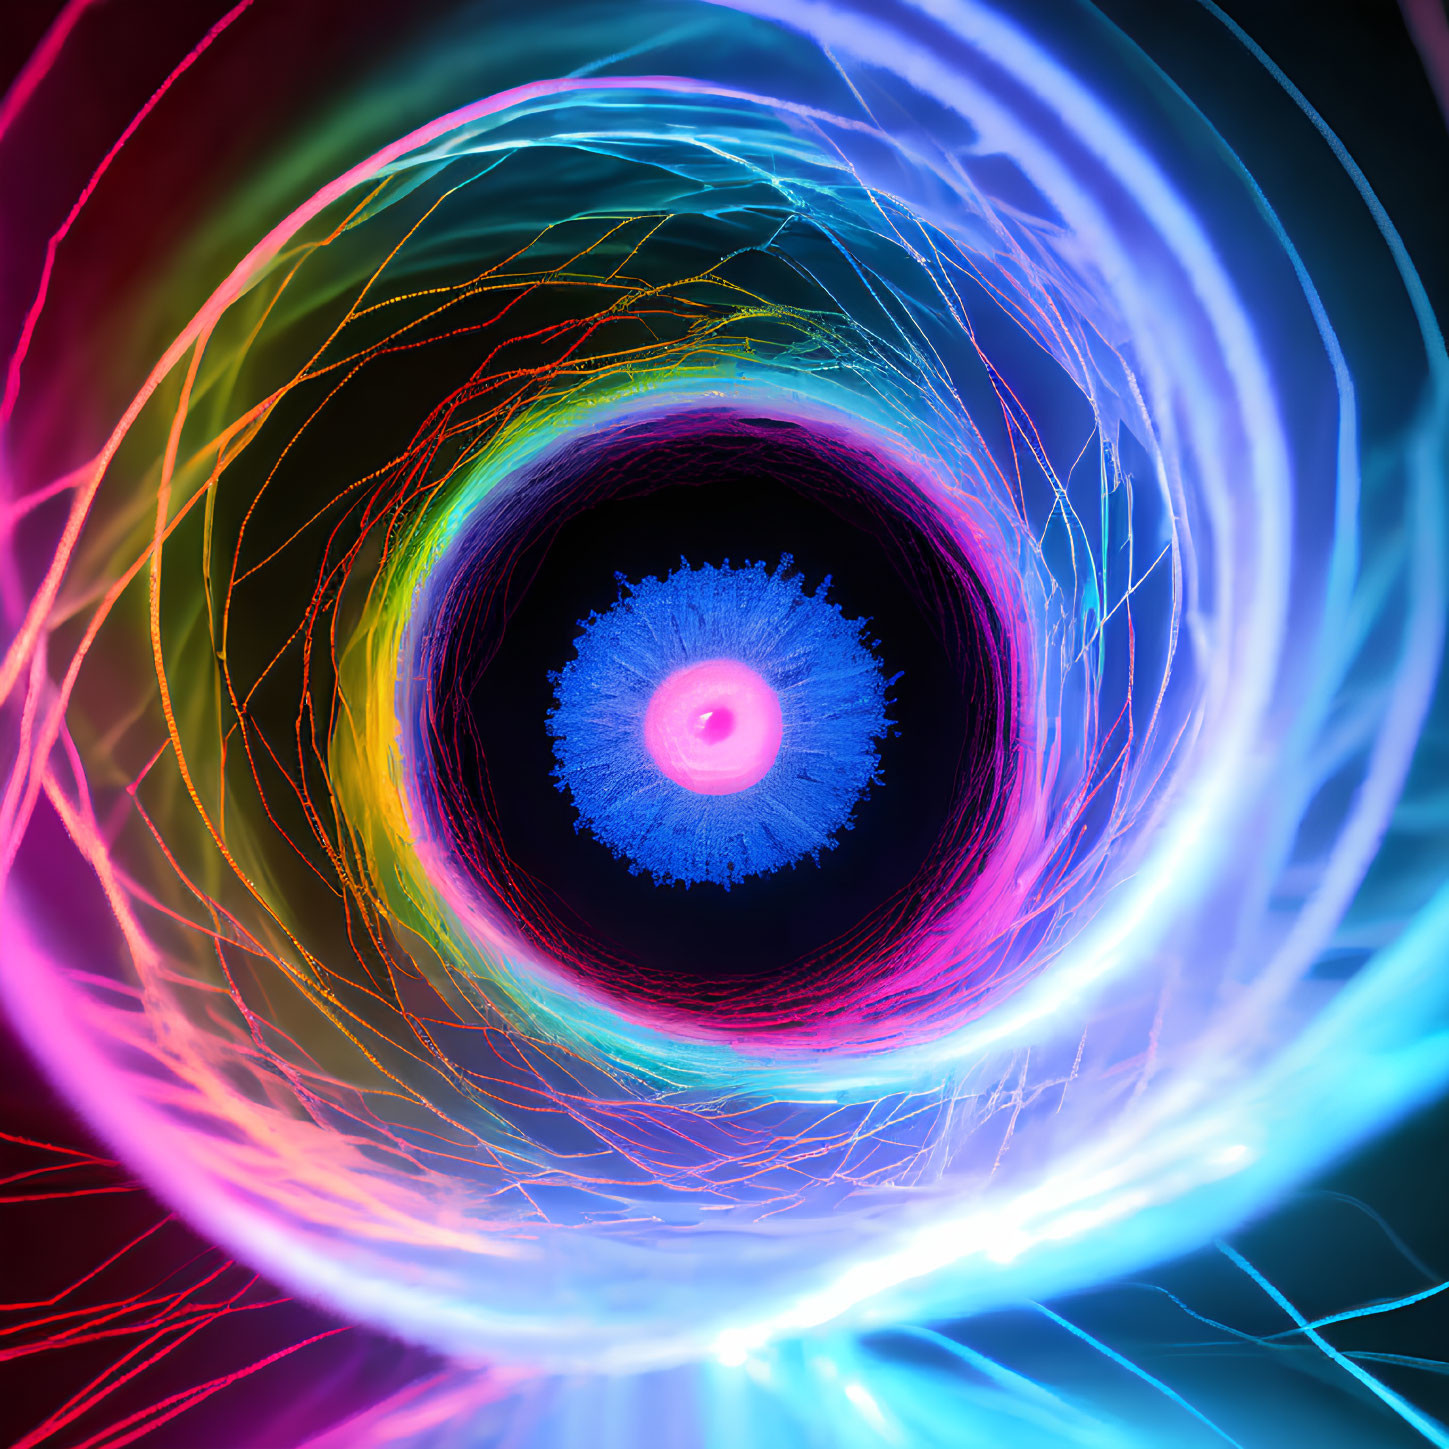 Colorful Abstract Digital Tunnel with Neon Lights in Blue, Pink, and Orange